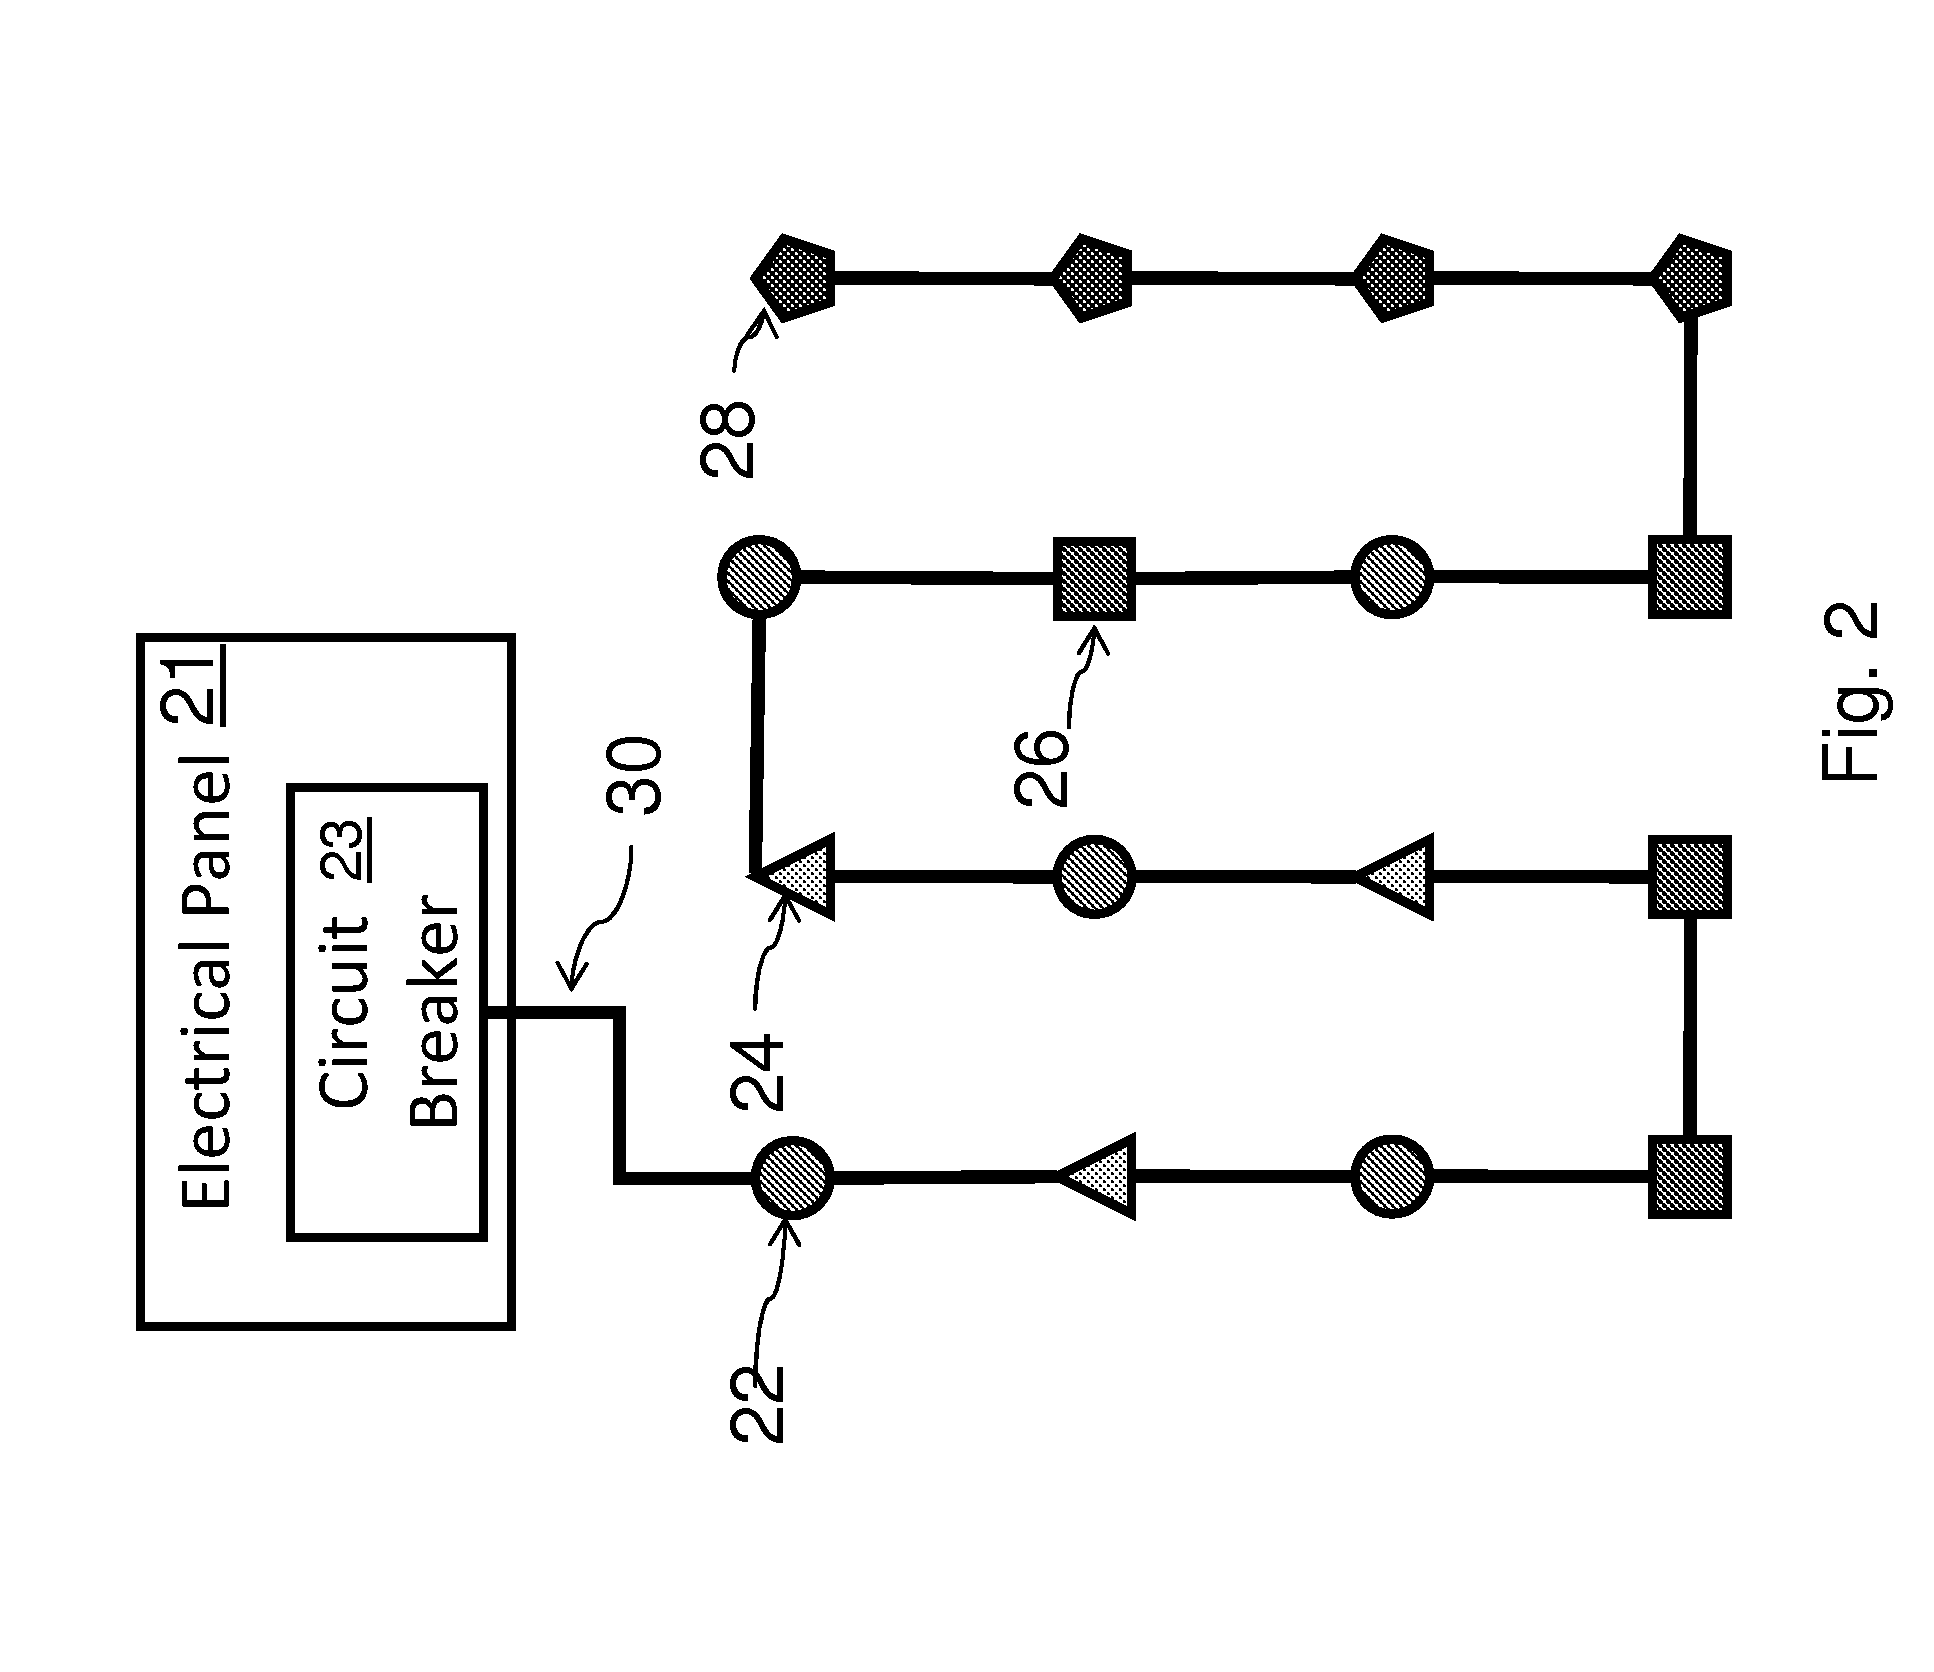 Wiring topology for a building with a wireless network